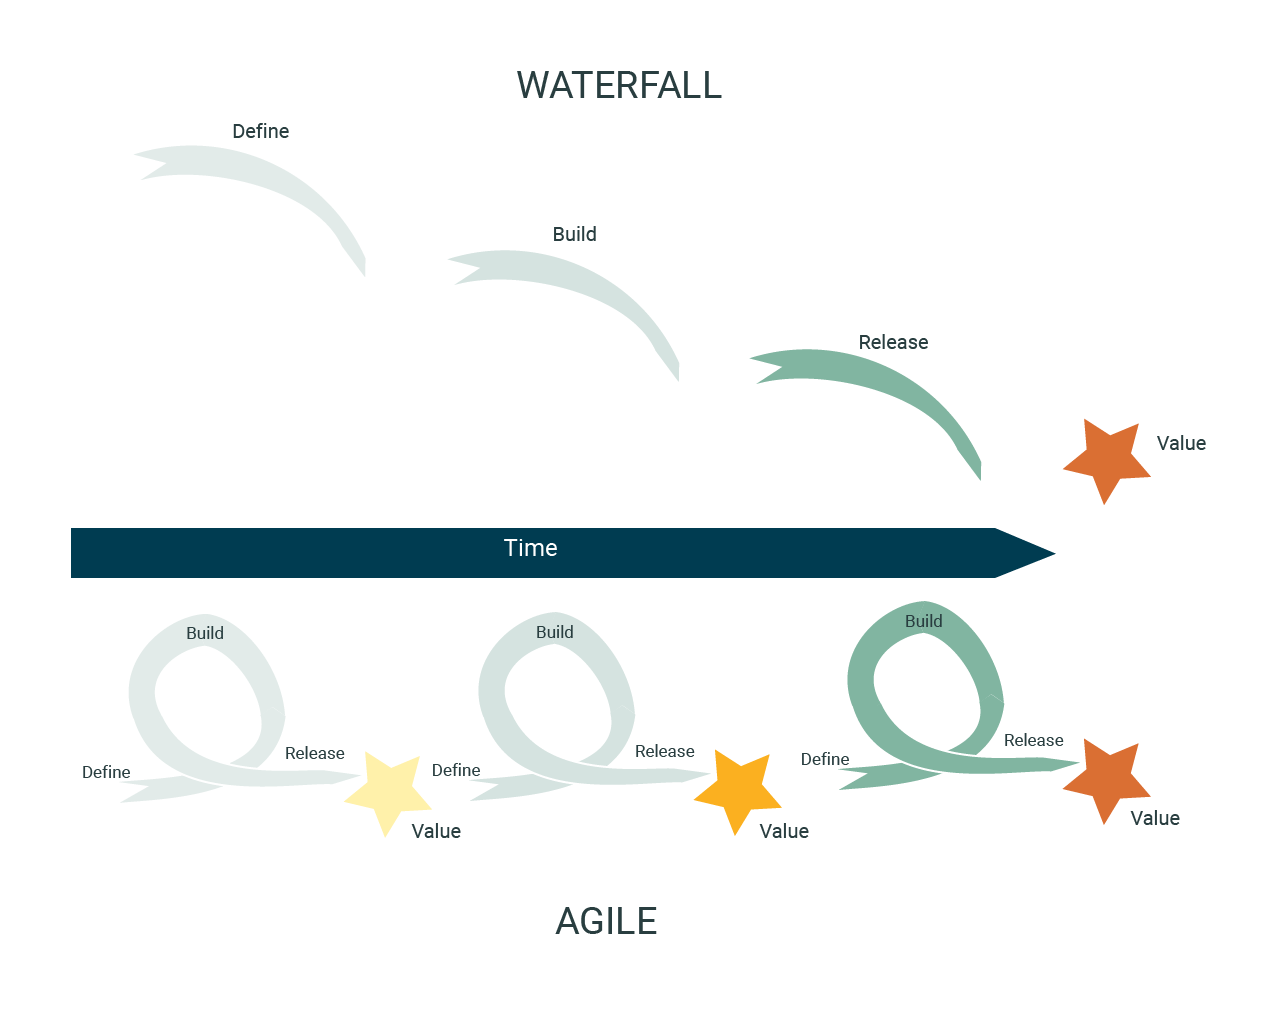 Agile v waterfall IT project management methodologydiagram - shows iterative nature of agile development versus the straight line nature of waterfall IT project management methodology